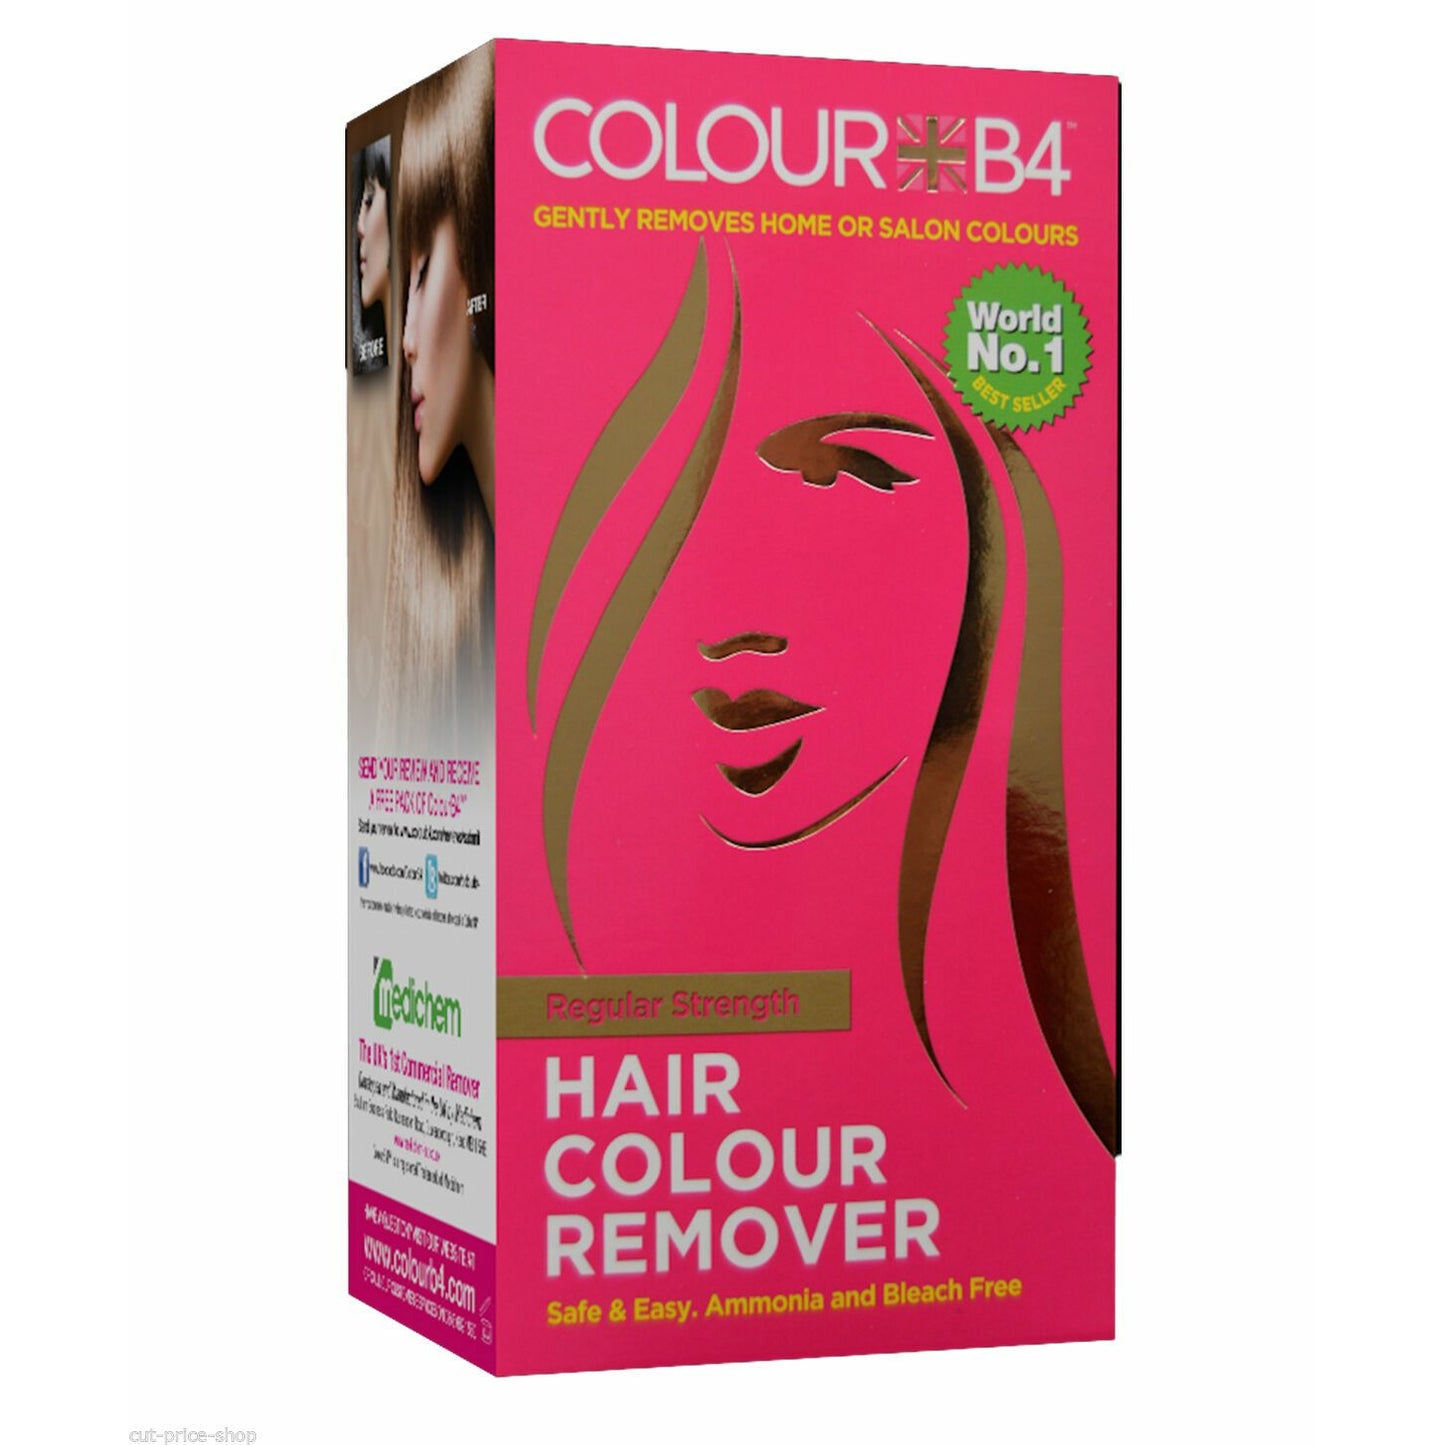 Colour B4:Hair colour remover *WARNING*